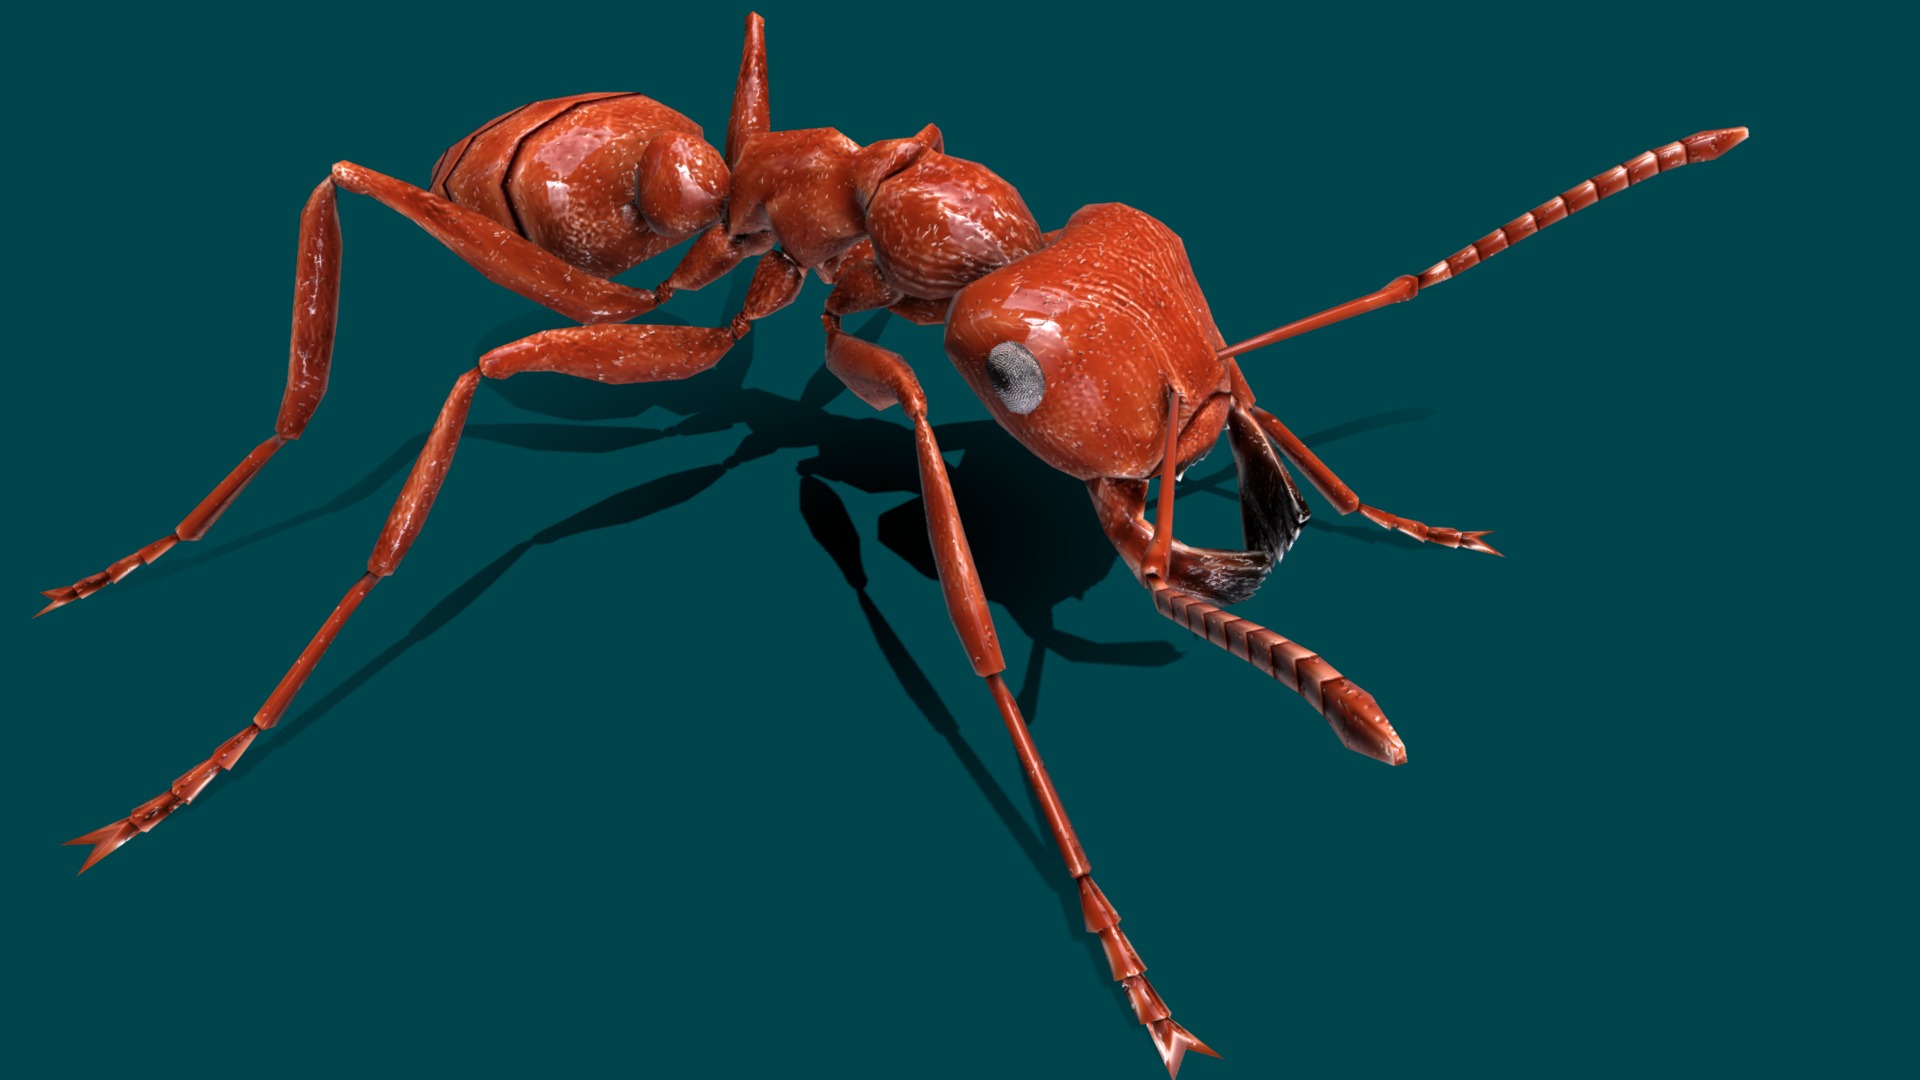 3D model Ant Lowpolys 3D - This is a 3D model of the Ant Lowpolys 3D. The 3D model is about a close-up of a spider.